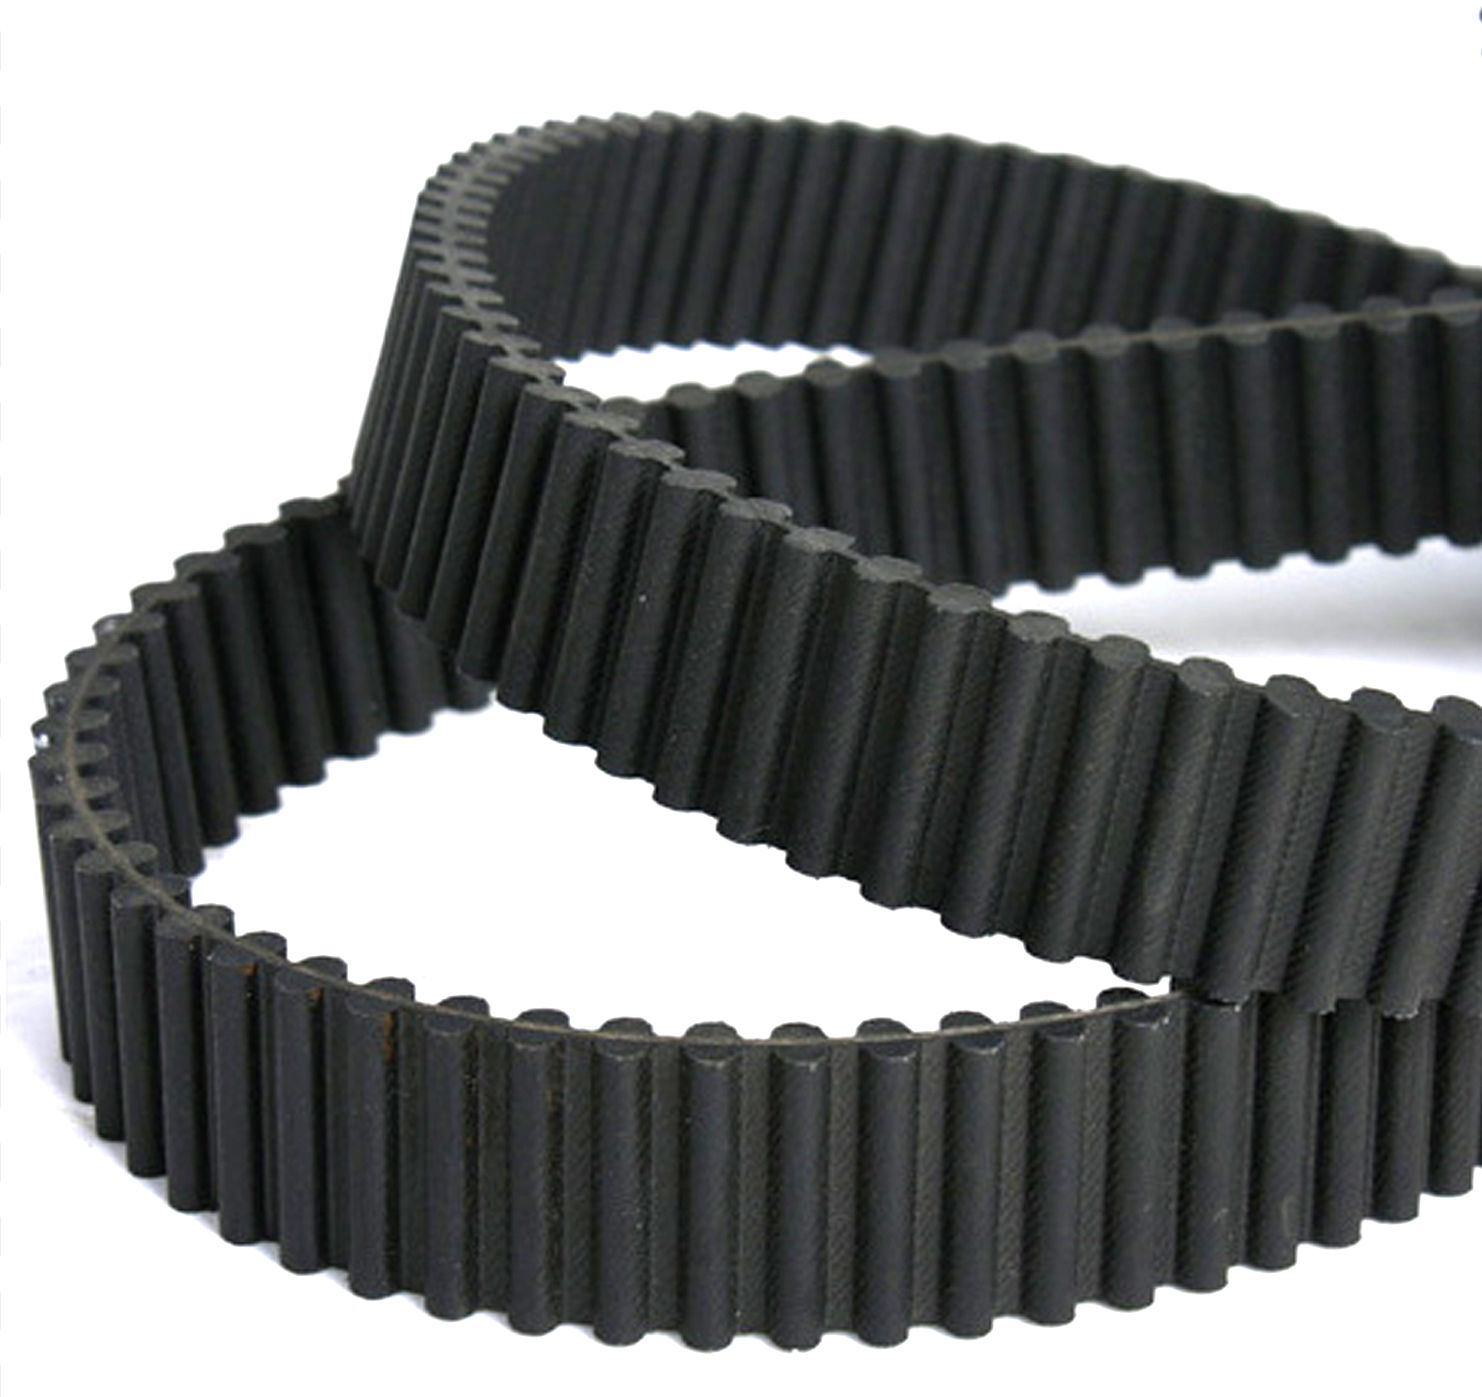 DAS8M 2000MM LONG 30MM WIDE 250 TOOTHED DOUBLE SIDE TIMING BELT